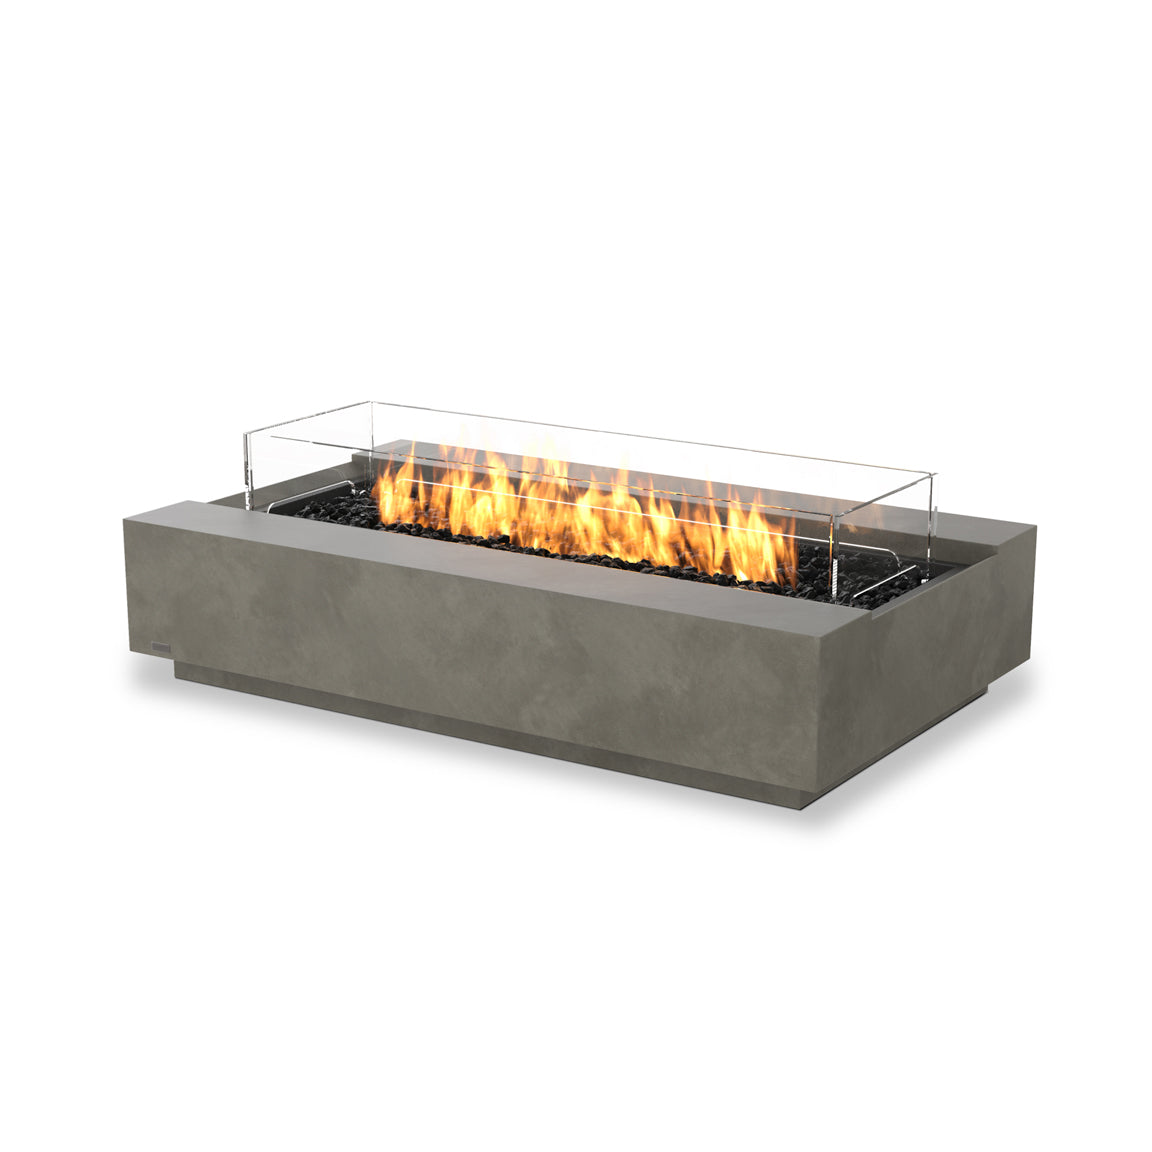 COSMO 50 FIRE PIT TABLE - NATURAL GAS / LIQUID PROPANE